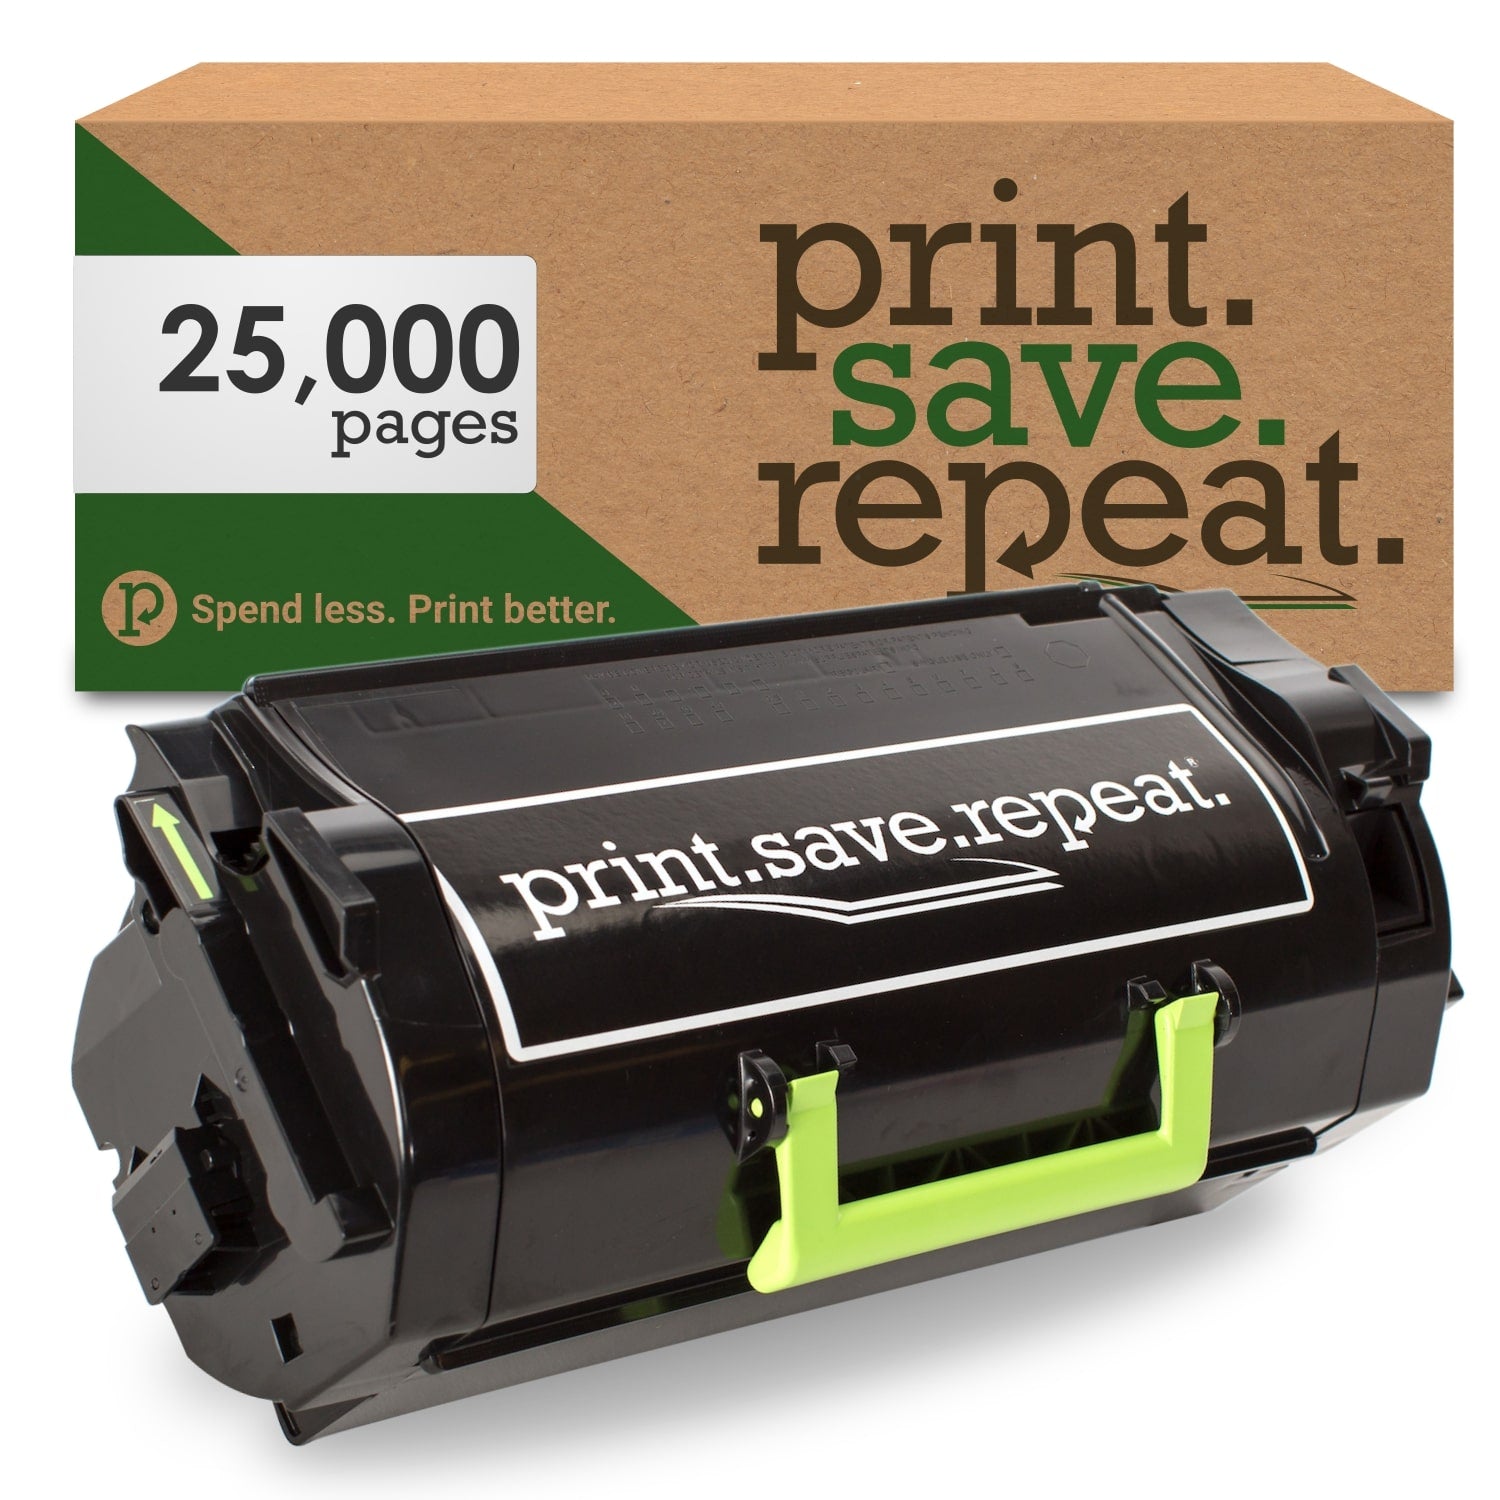 Print.Save.Repeat. Lexmark 521H High Yield Remanufactured Toner Cartridge (52D1H00) for MS710, MS711, MS810, MS811, MS812 [25,000 Pages]